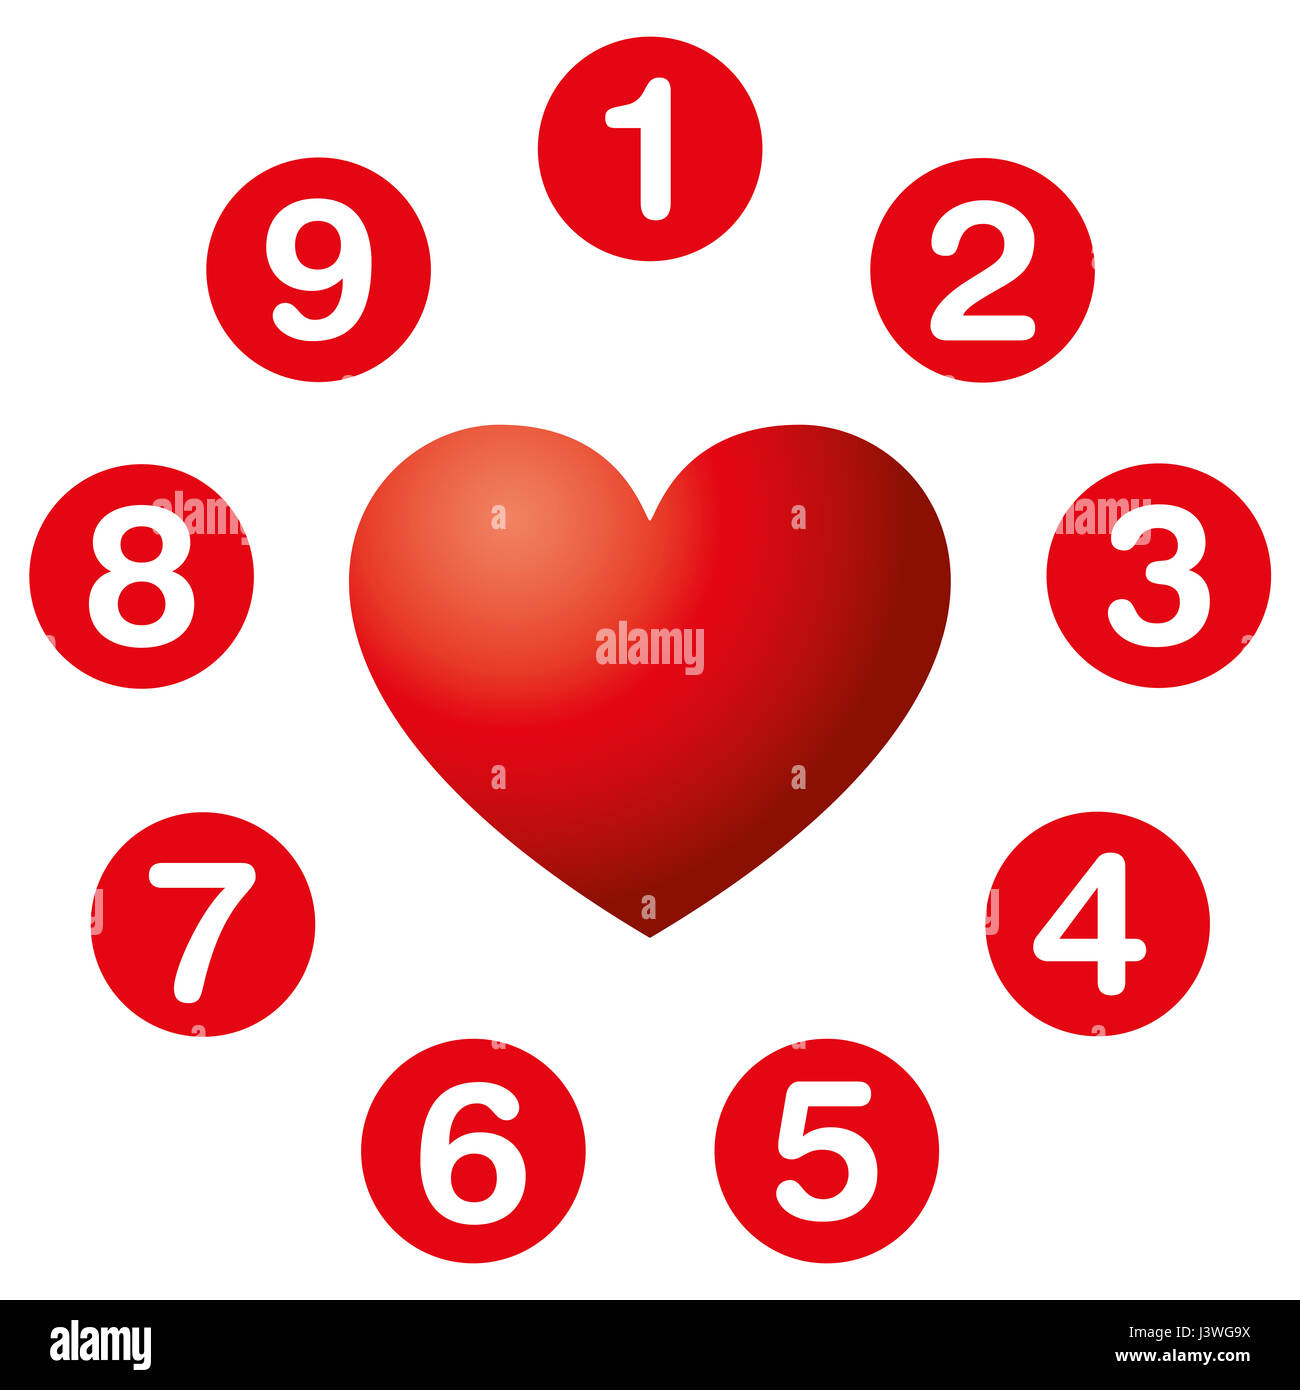 Heart's desire numbers circle. Numerology. Soul urge numbers in red circles around a heart symbol. The numbers reveal what we want more, what us drive Stock Photo